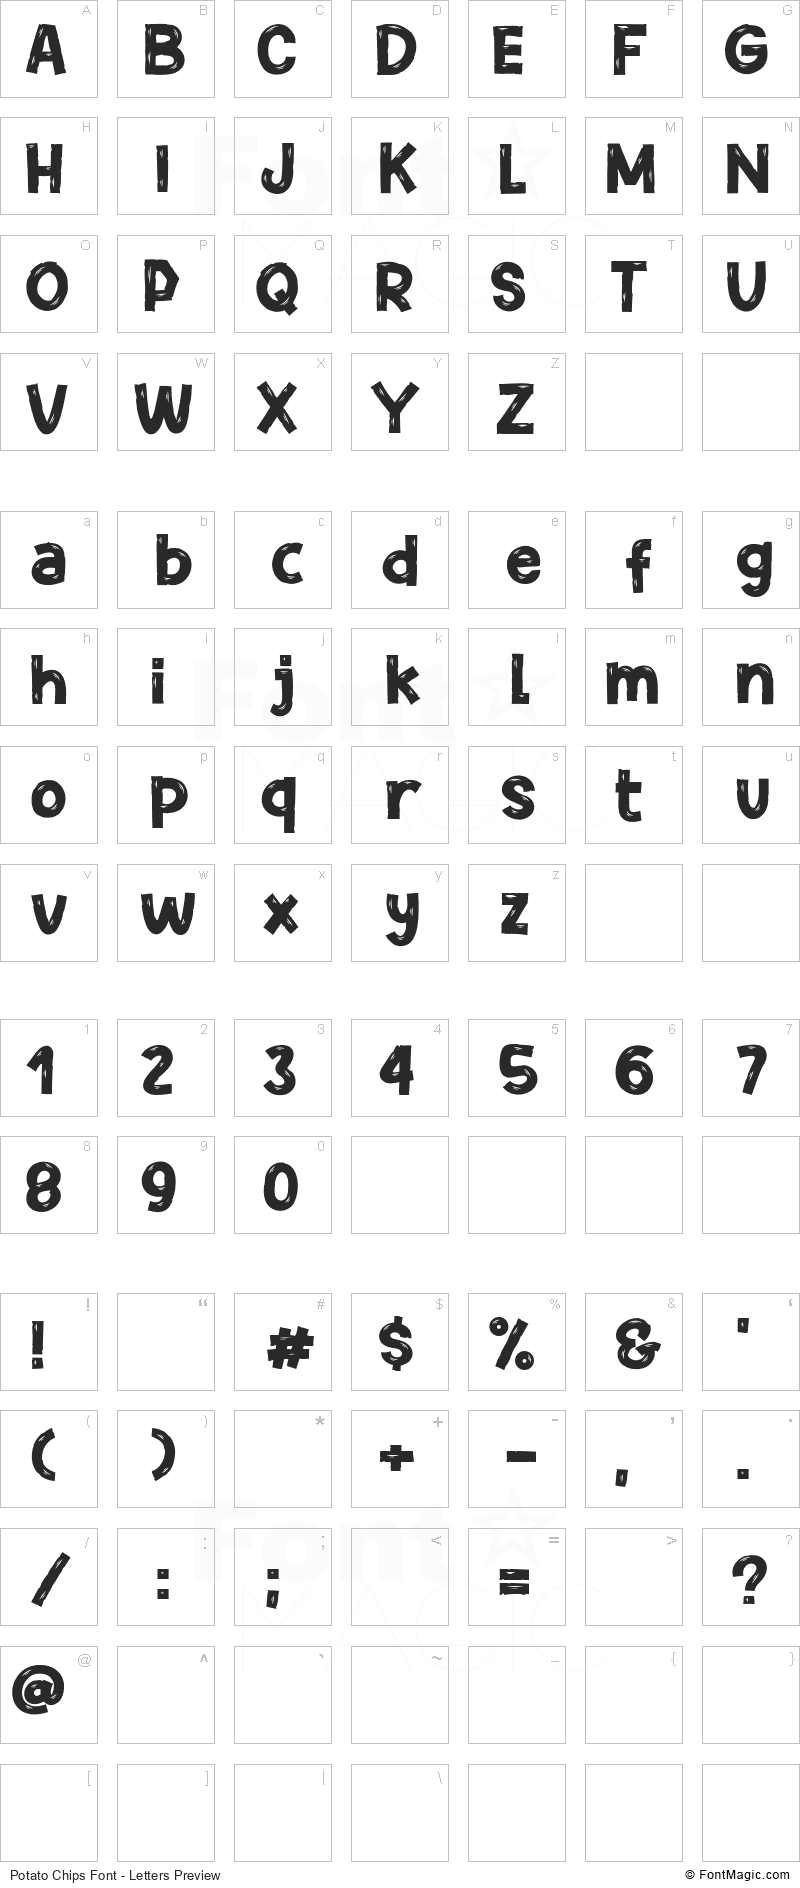 Potato Chips Font - All Latters Preview Chart